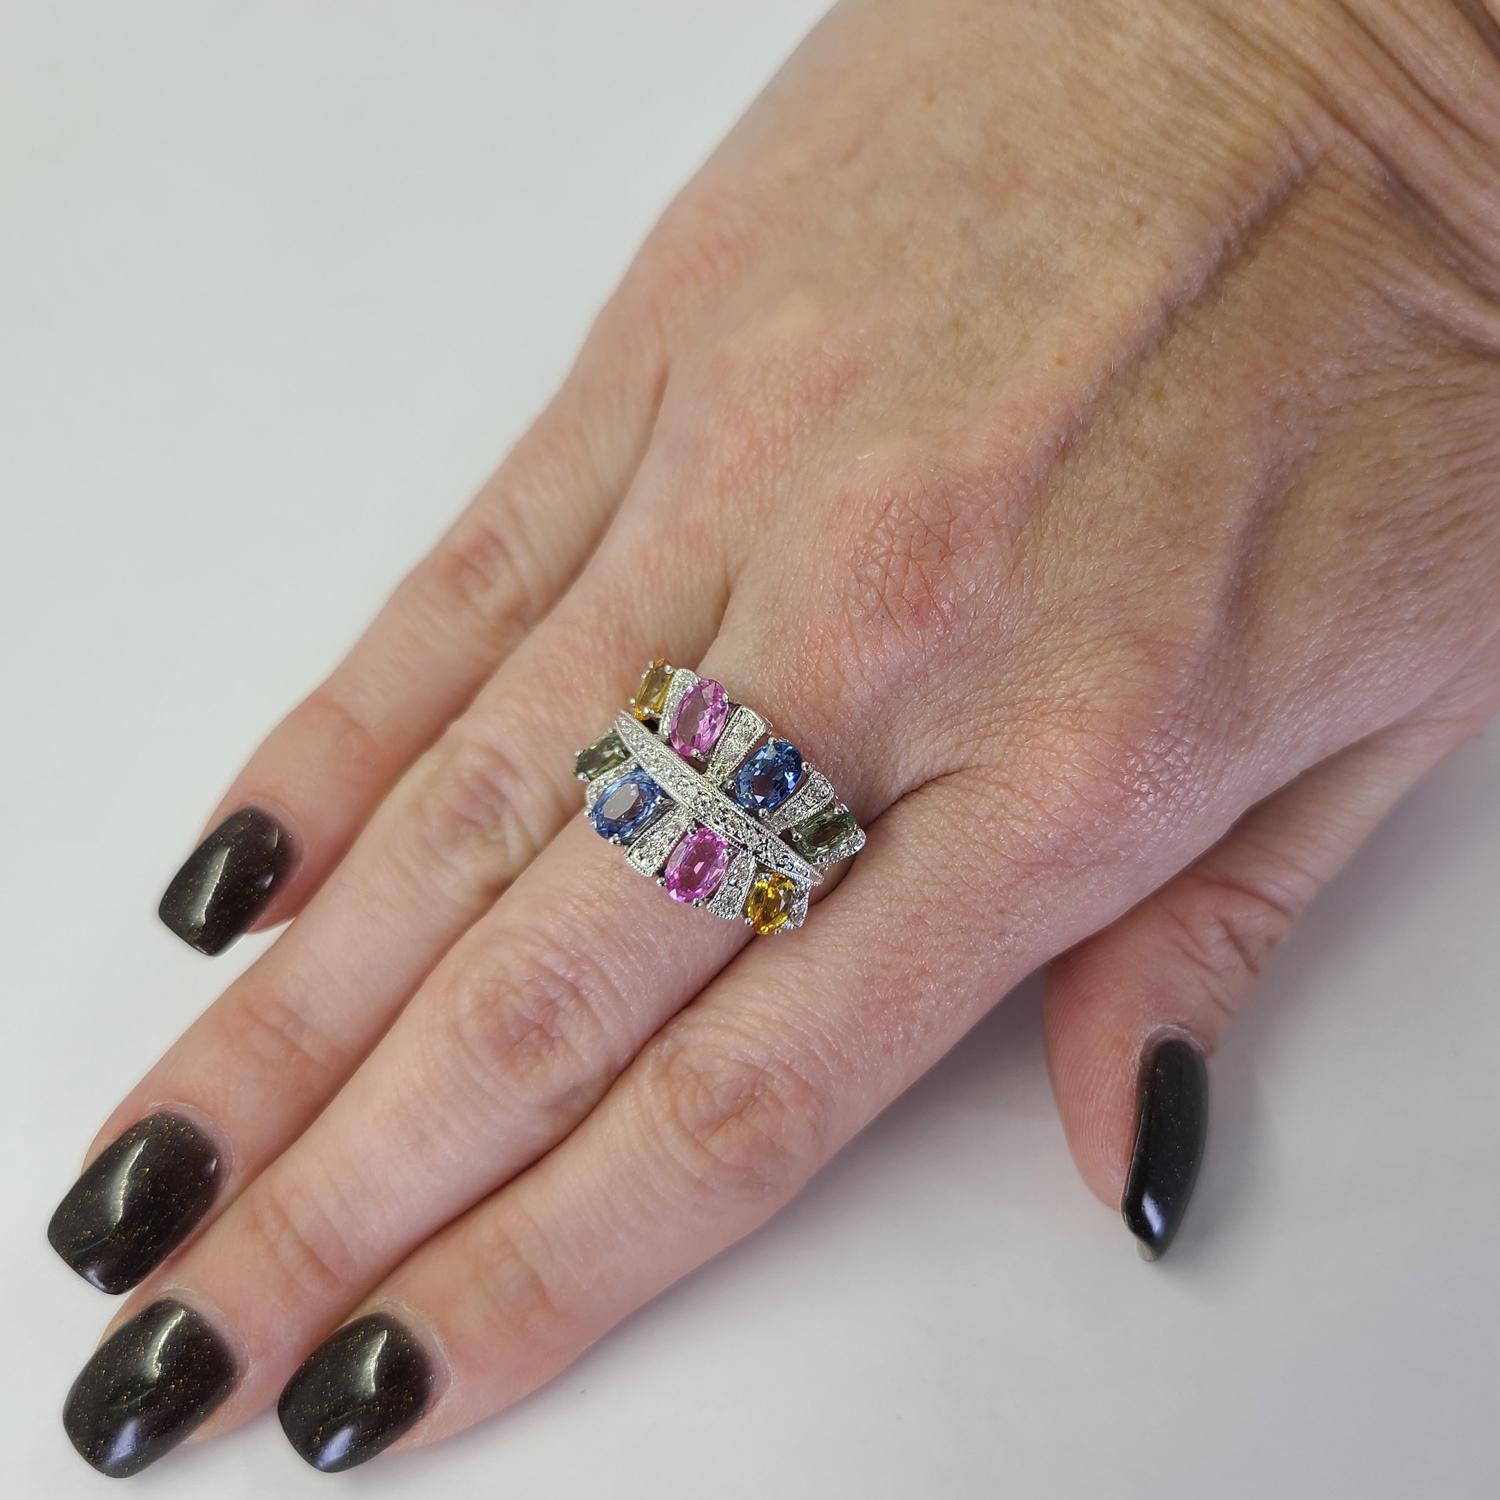 14 Karat White Gold Ring Featuring 8 Oval Cut Multicolor Sapphires Totaling Approximately 5 Carats Accented By 29 Round Diamonds of SI Clarity & G/H Color Totaling 0.15 Carats. Finger Size 7; Purchase Includes One Sizing Service. Finished Weight Is